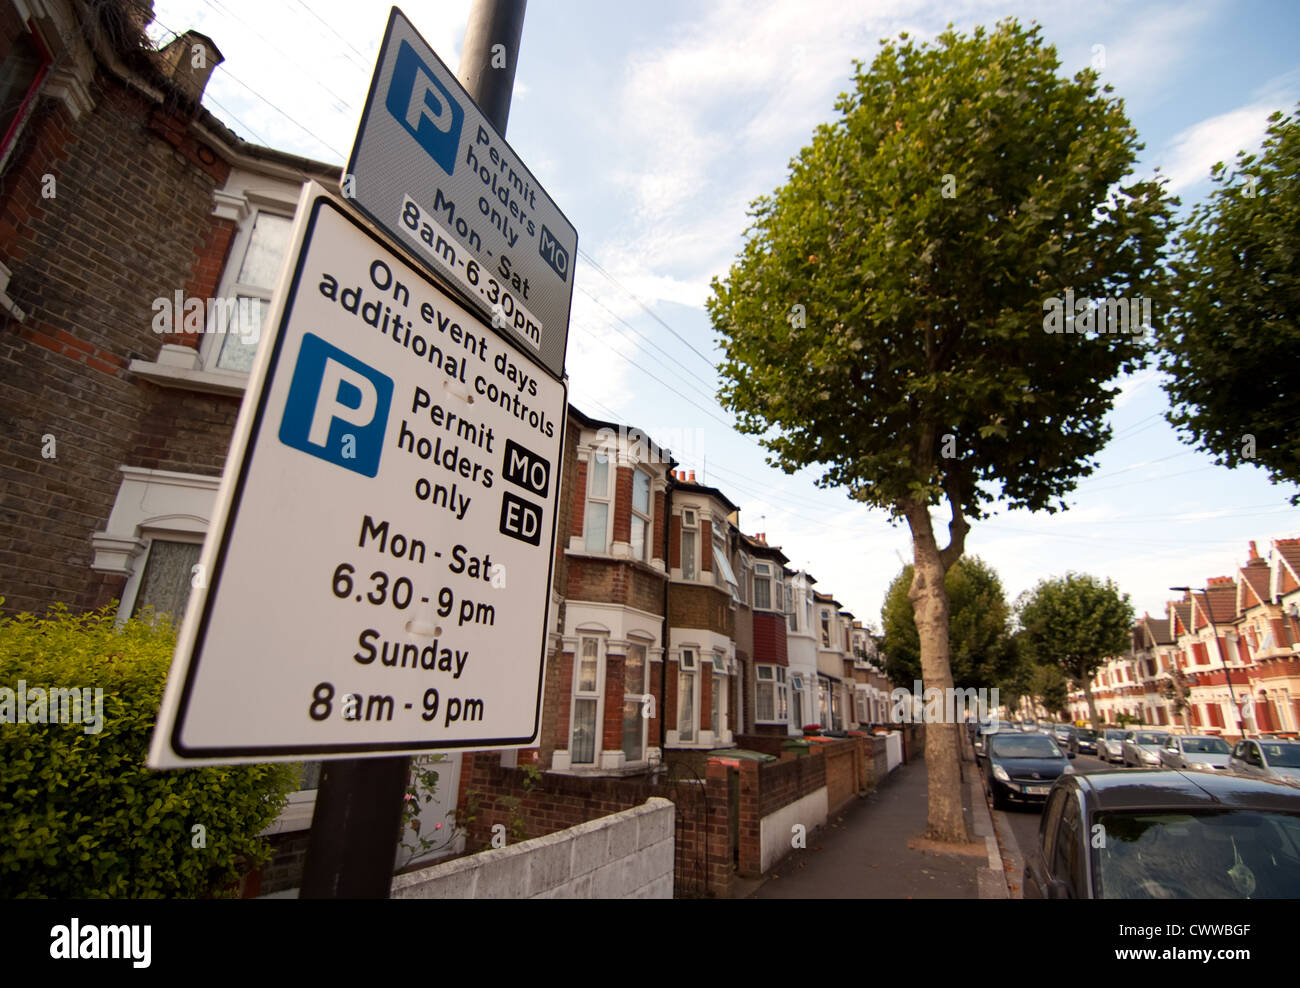 Permit holders only parking sign from the London borough of newham during the London 2012 Olympic games Stock Photo